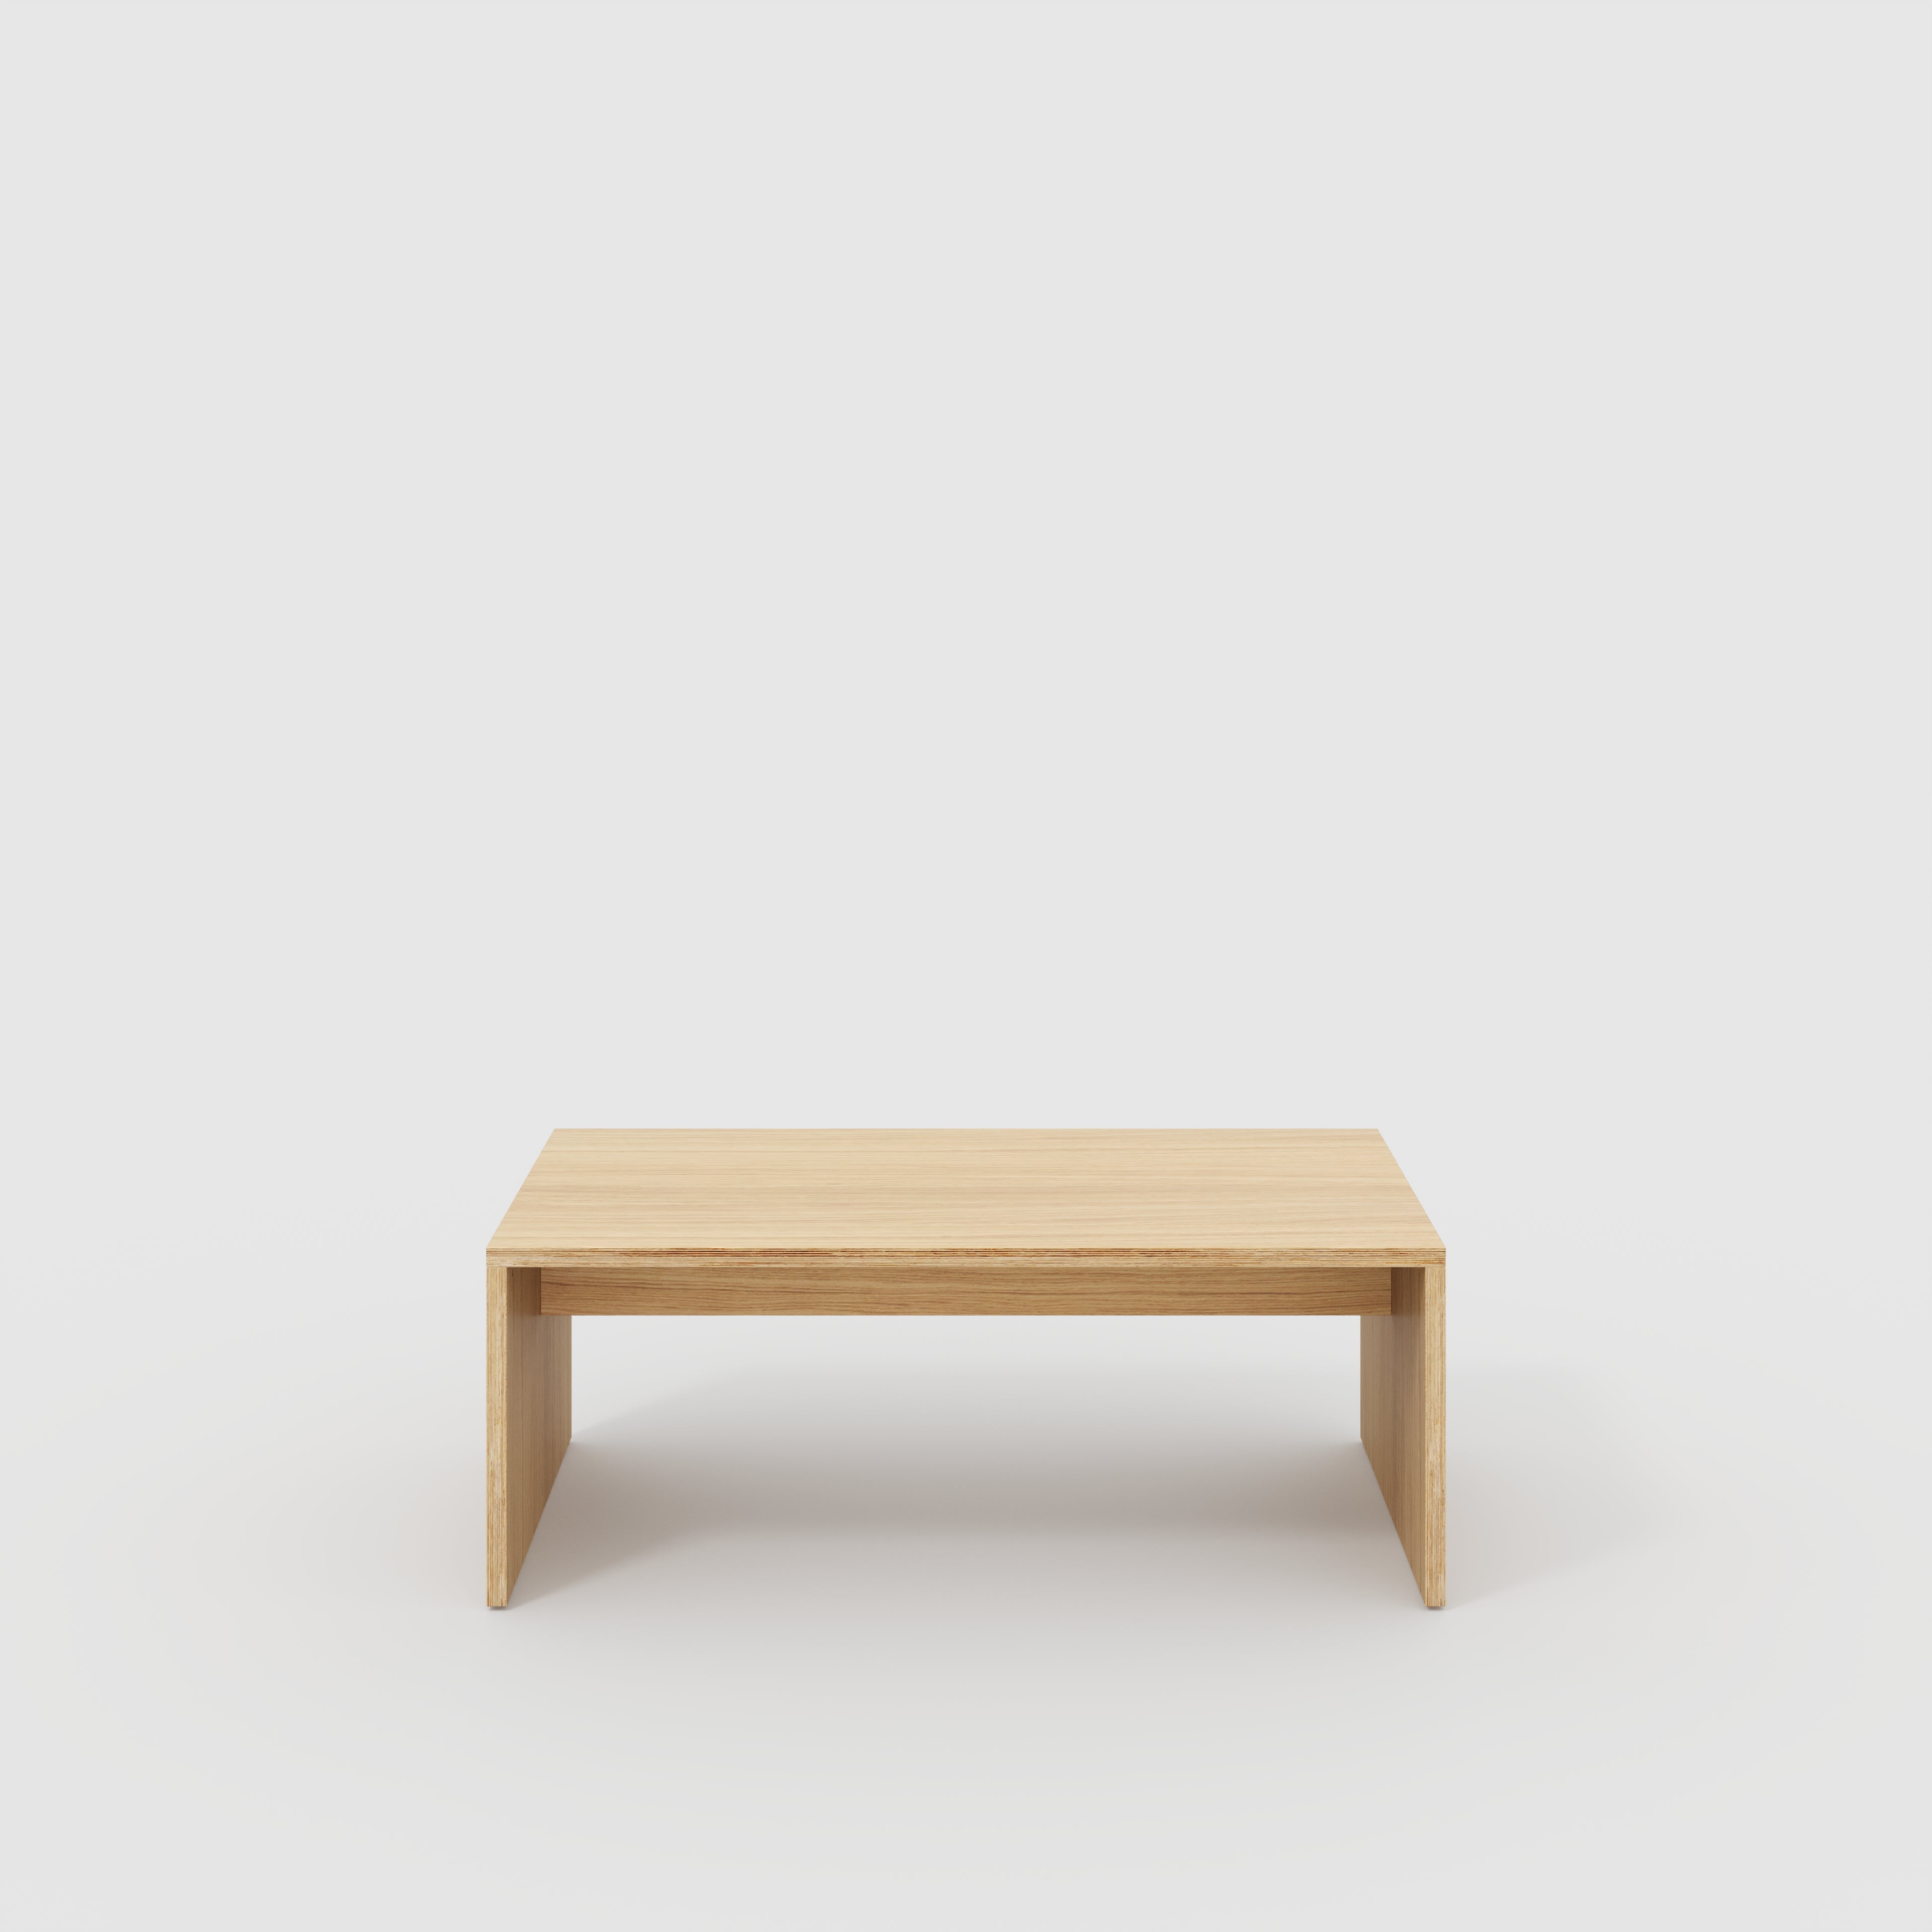 Coffee Table with Solid Sides - Plywood Oak - 1200(w) x 600(d) x 450(h)